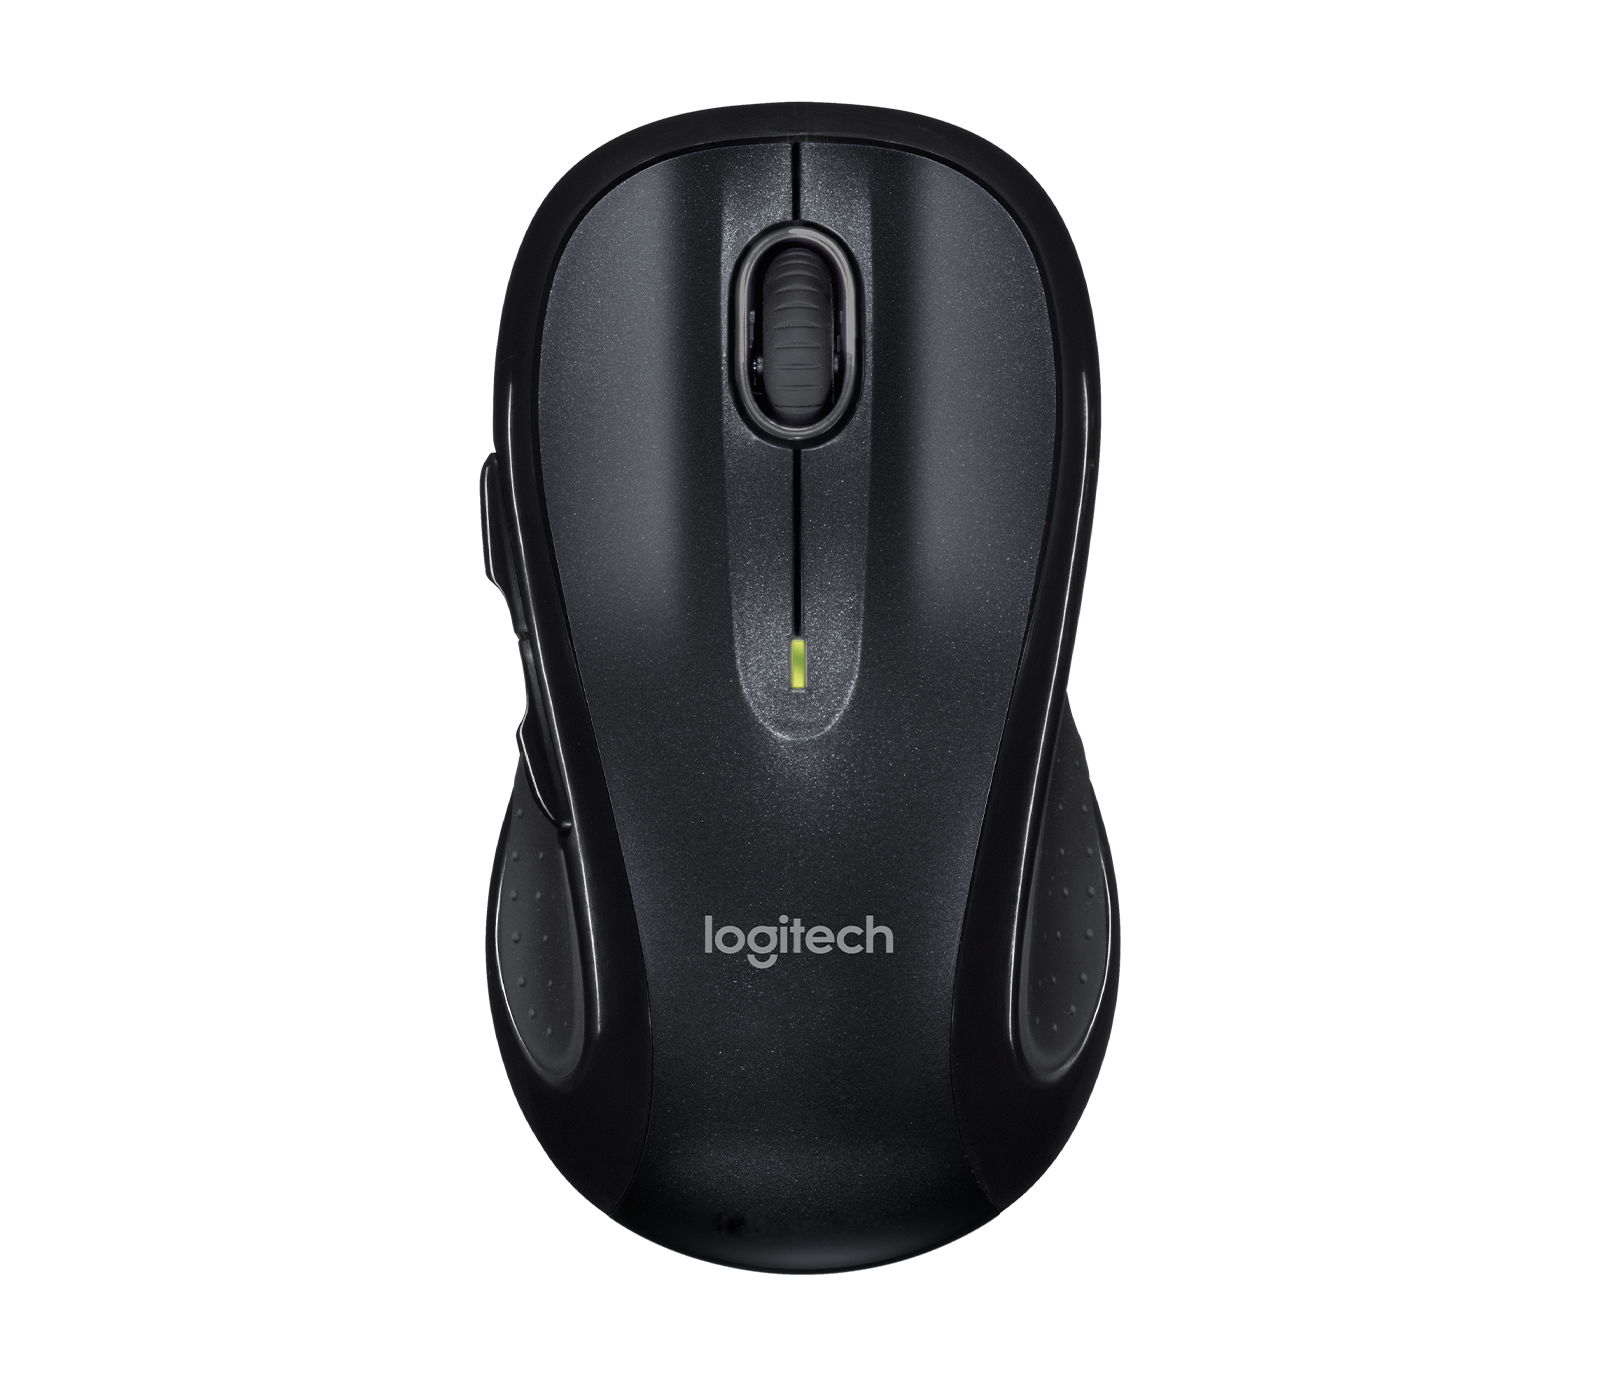 Logitech Wireless Mouse with Tracking